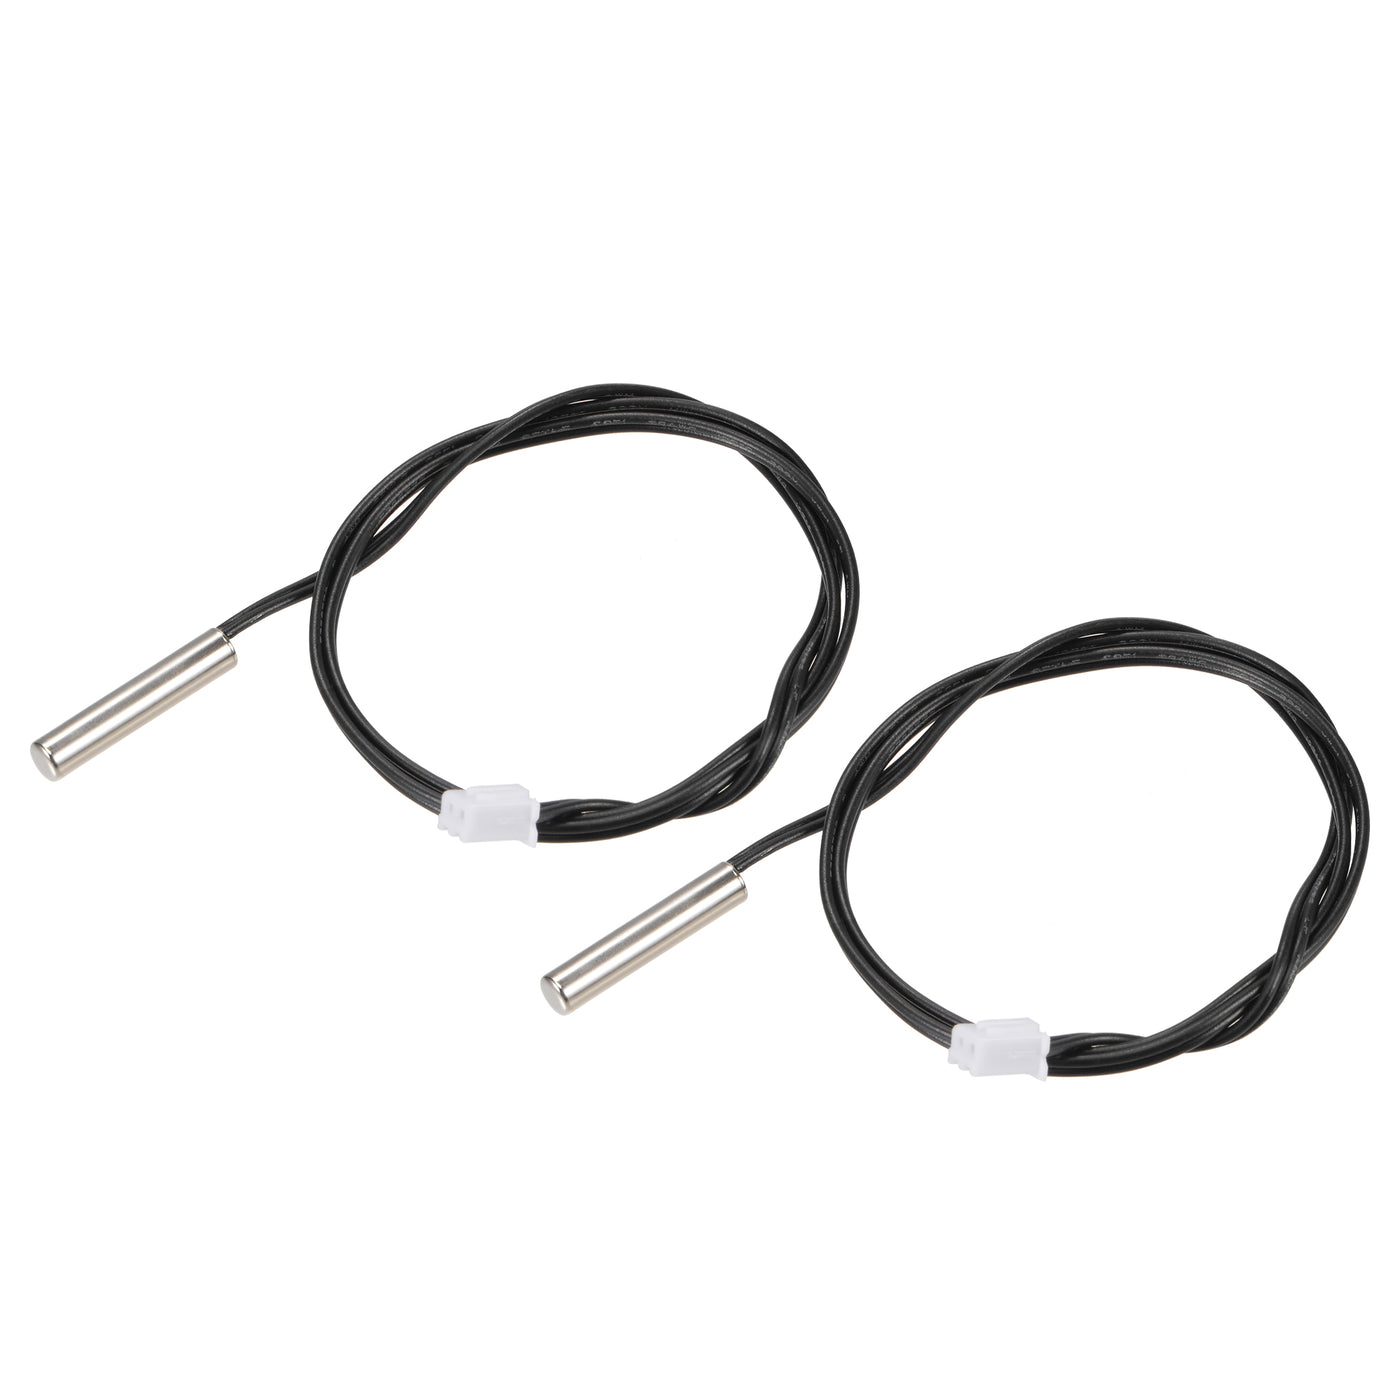 uxcell Uxcell 2pcs 20K Temperature Sensor Probe, Stainless Steel NTC Thermal Sensor Probe 50cm Digital Thermometer Extension Cable